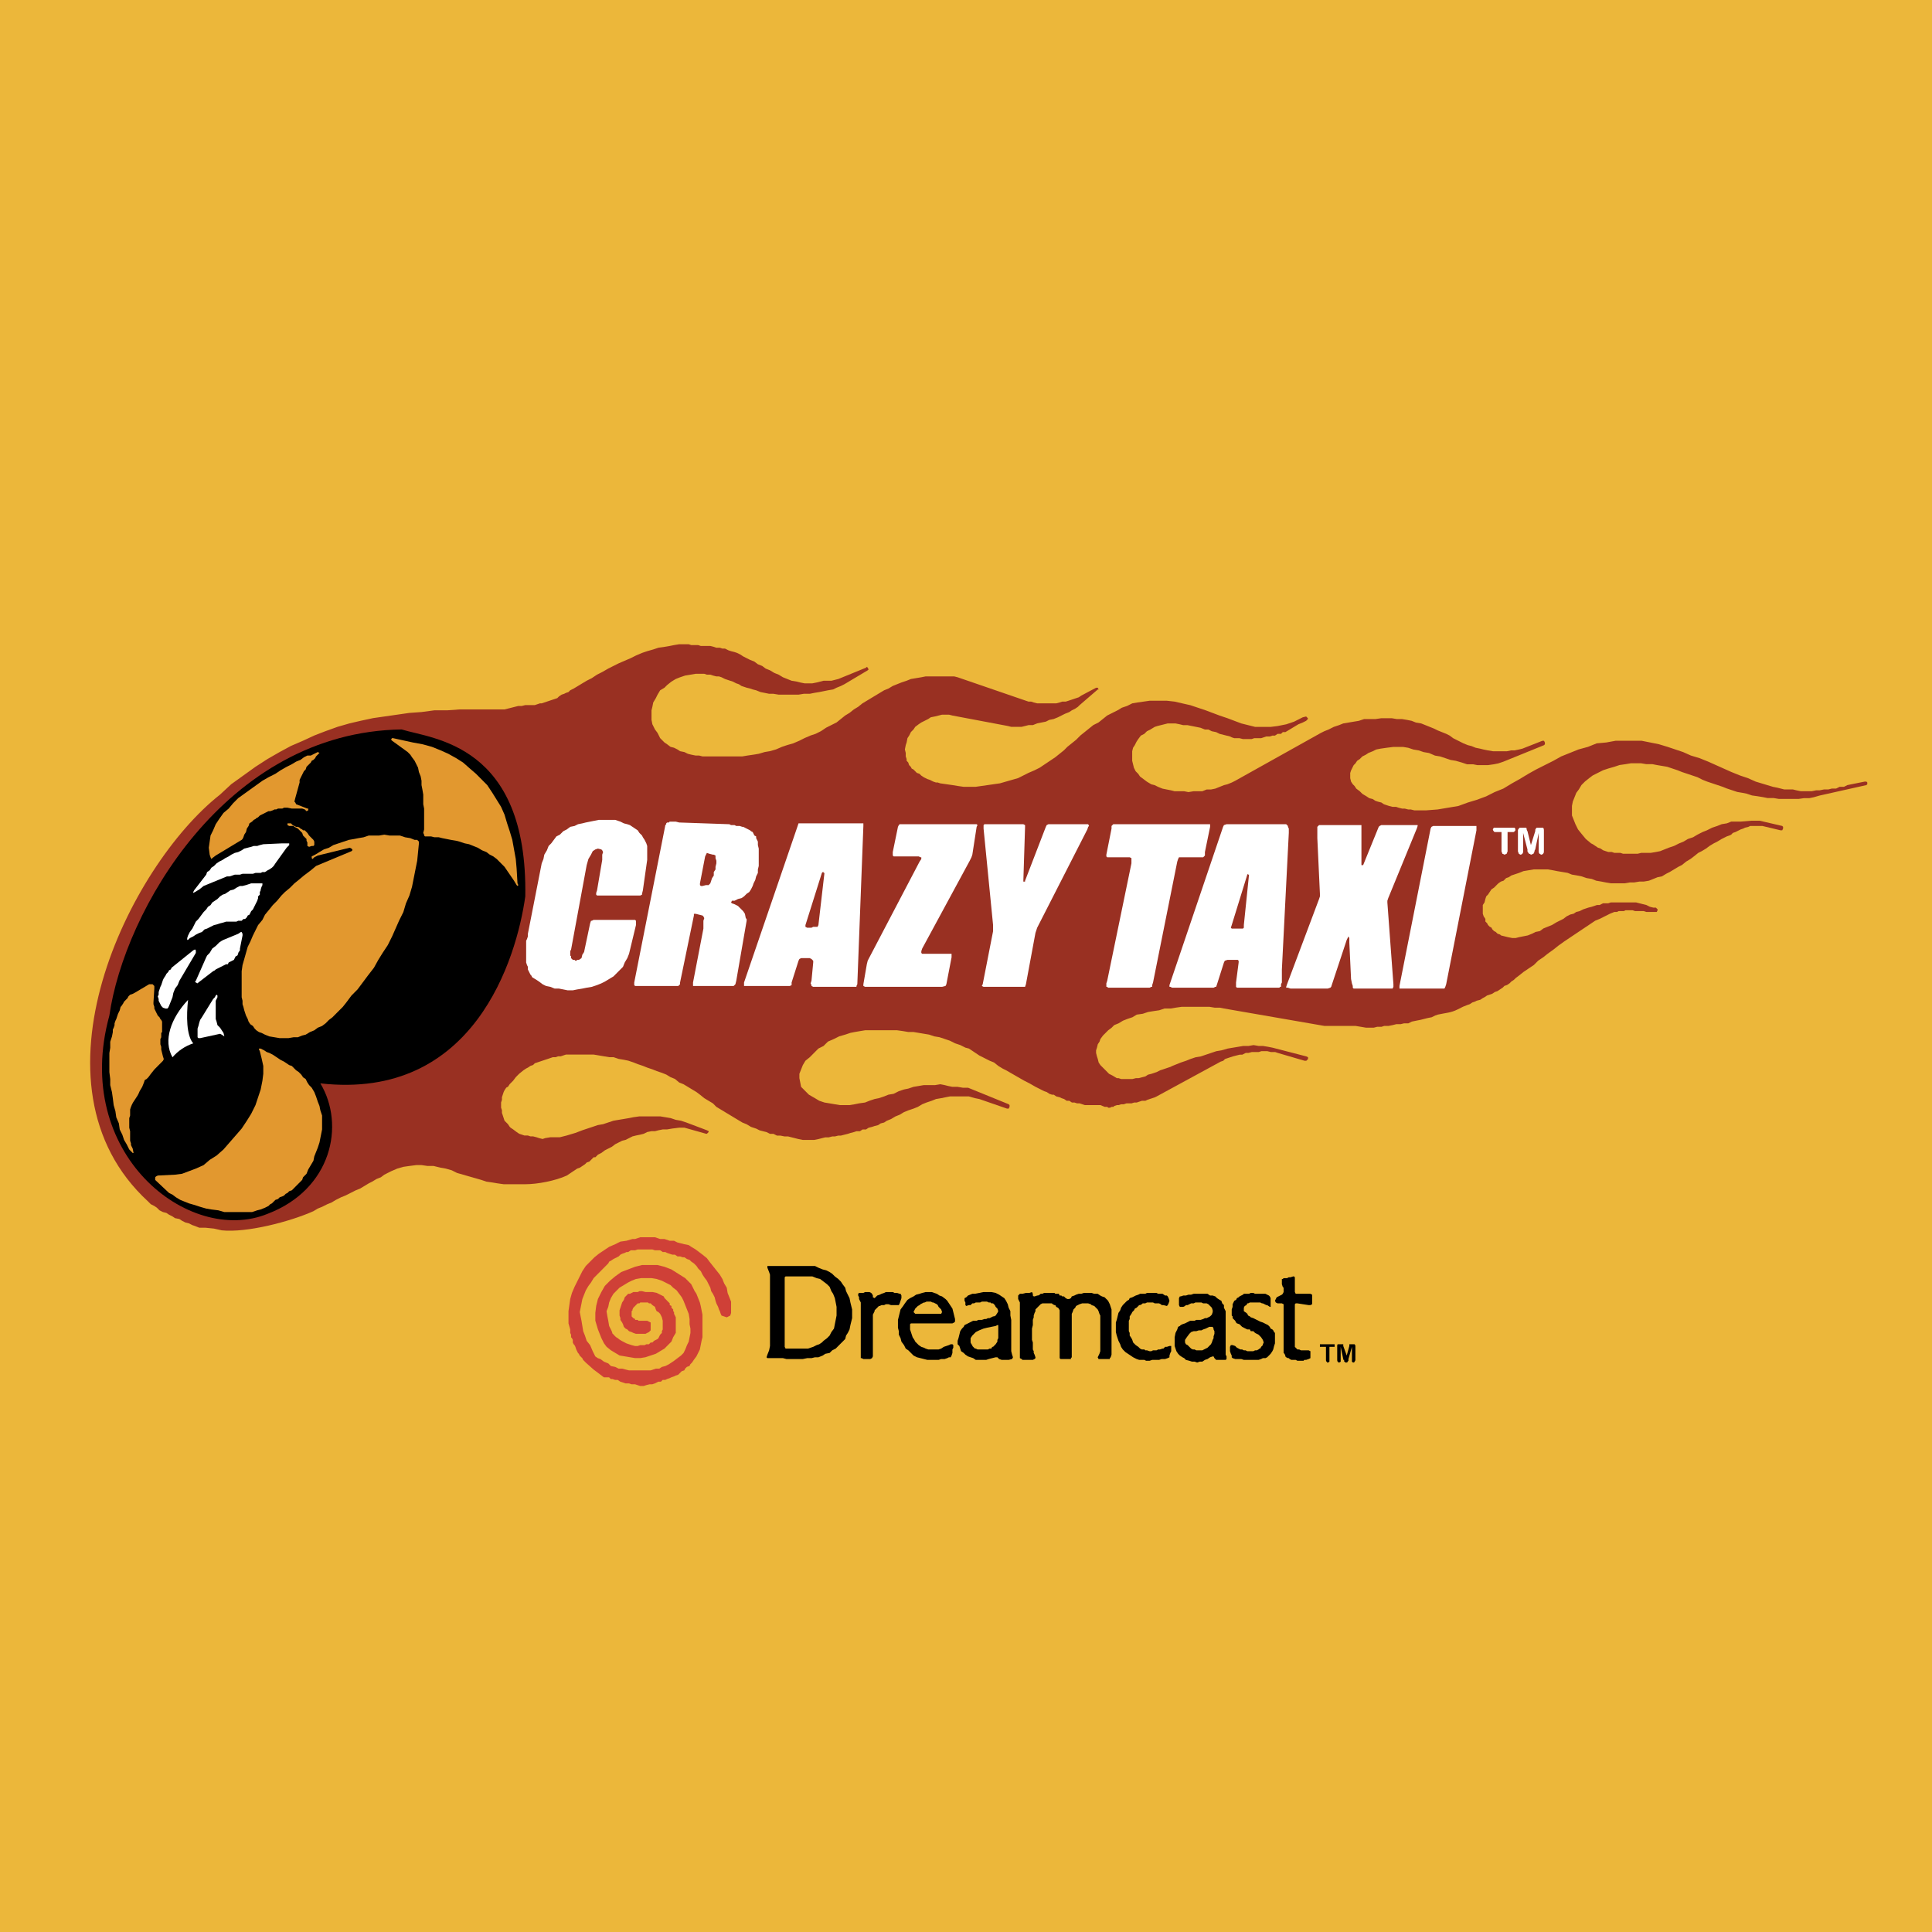 _images/crazy-taxi.png